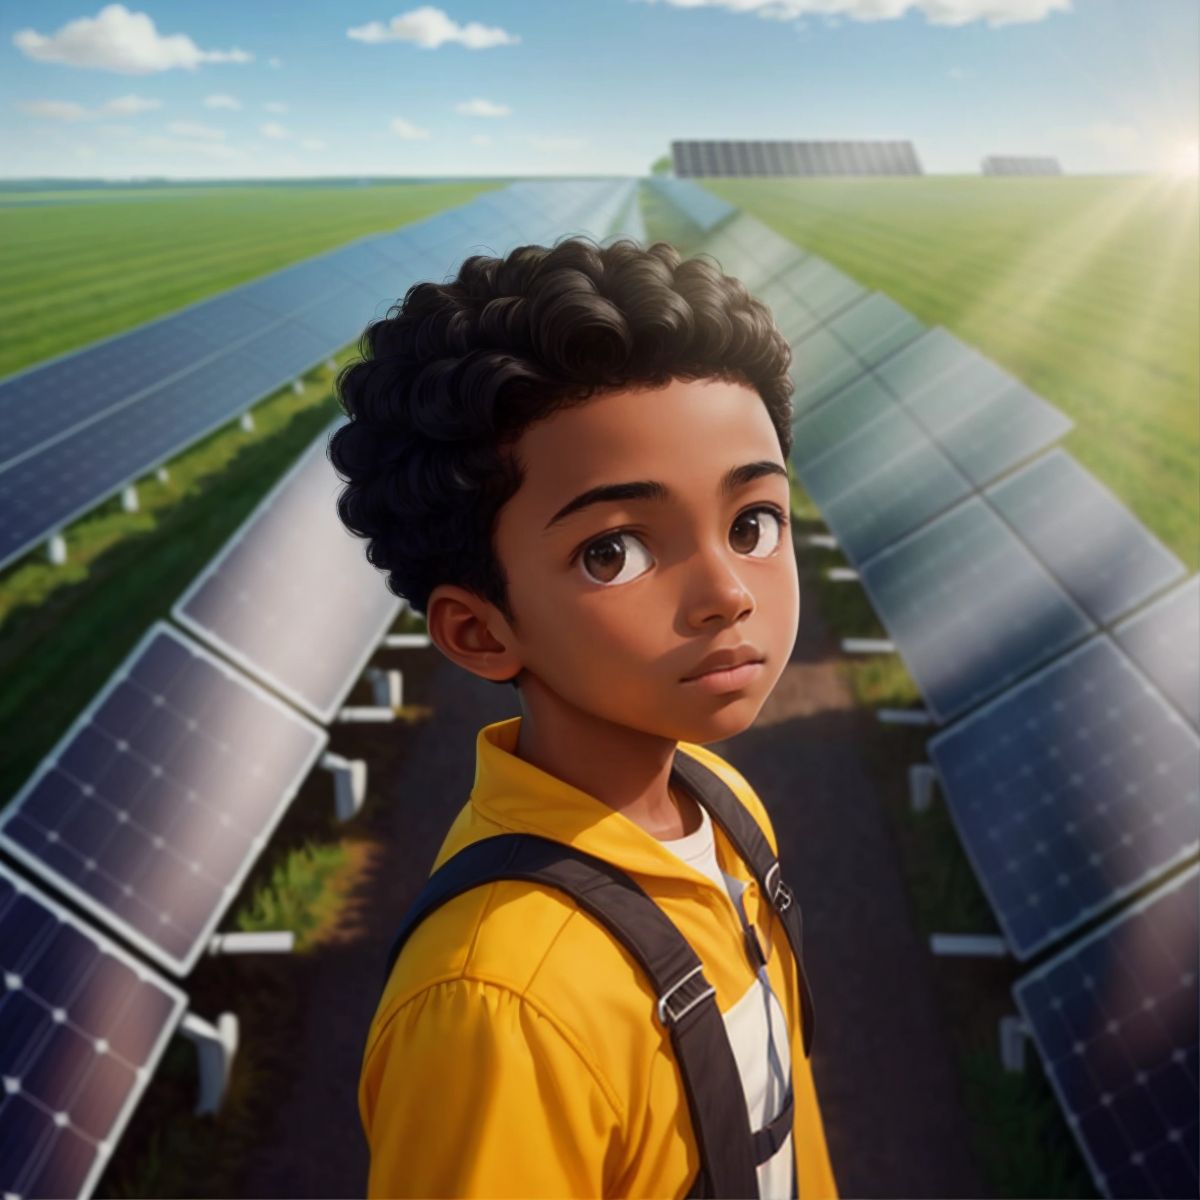 A wide view of a solar farm with rows of solar panels, and Kid 1 Boy in the foreground looking amazed